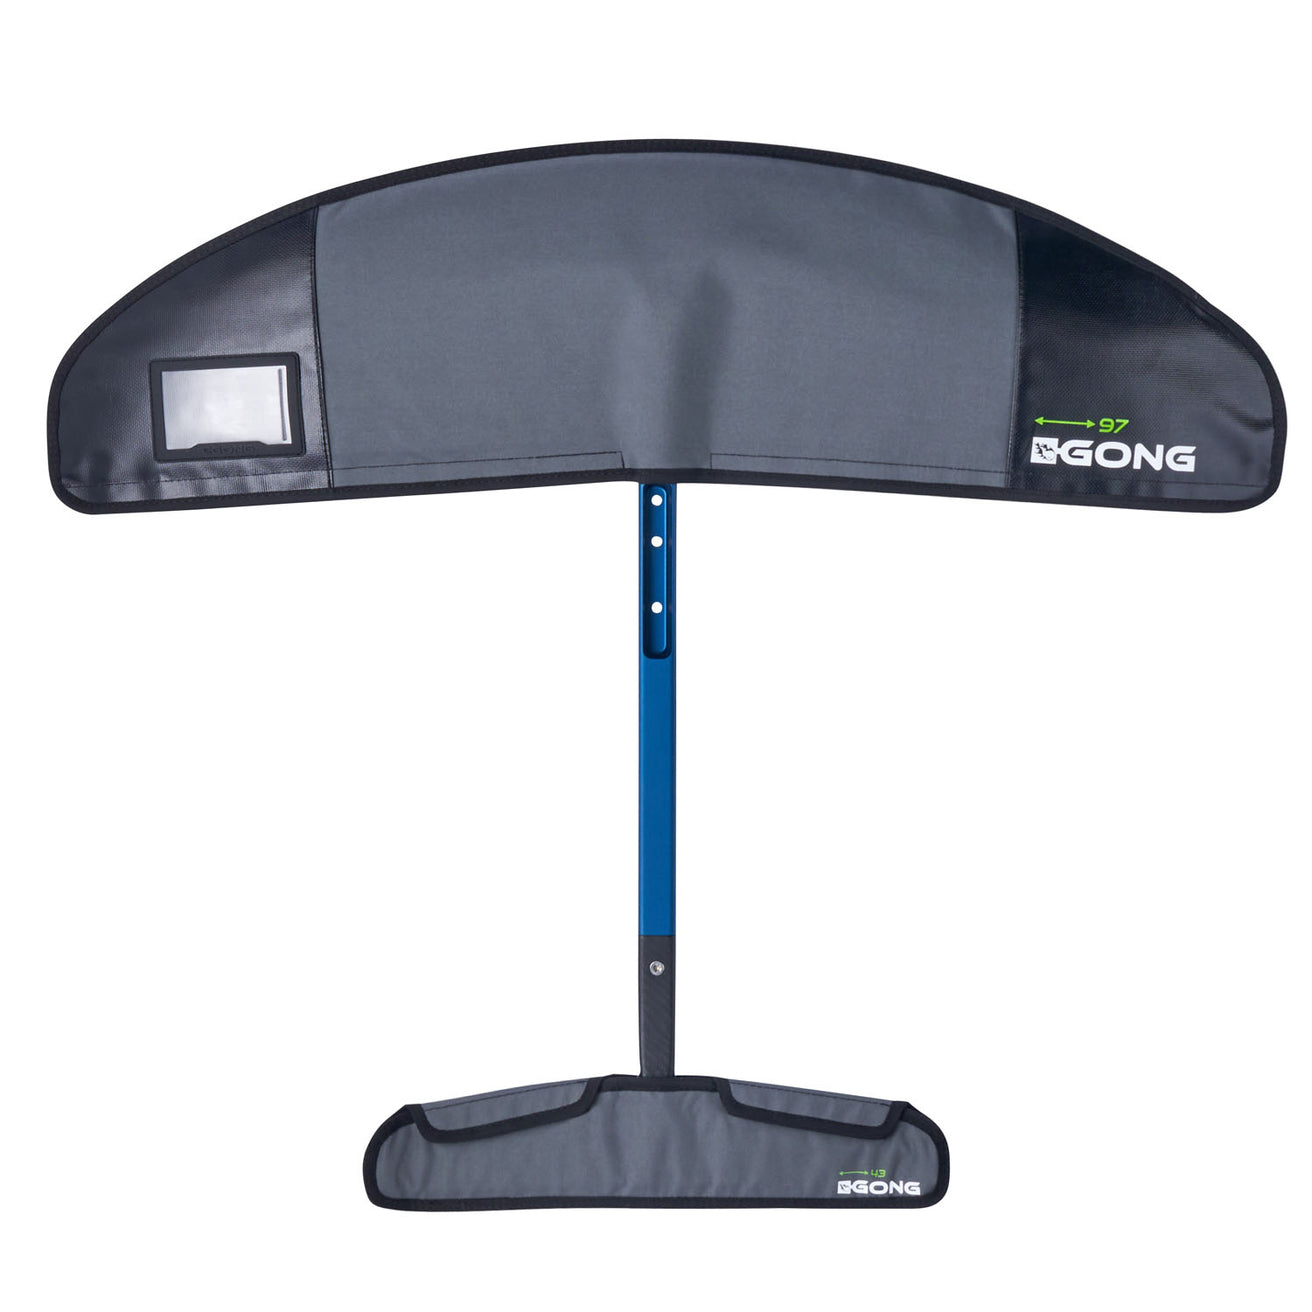 GONG | Foil Cover Front Wing T Second Choix 107X20